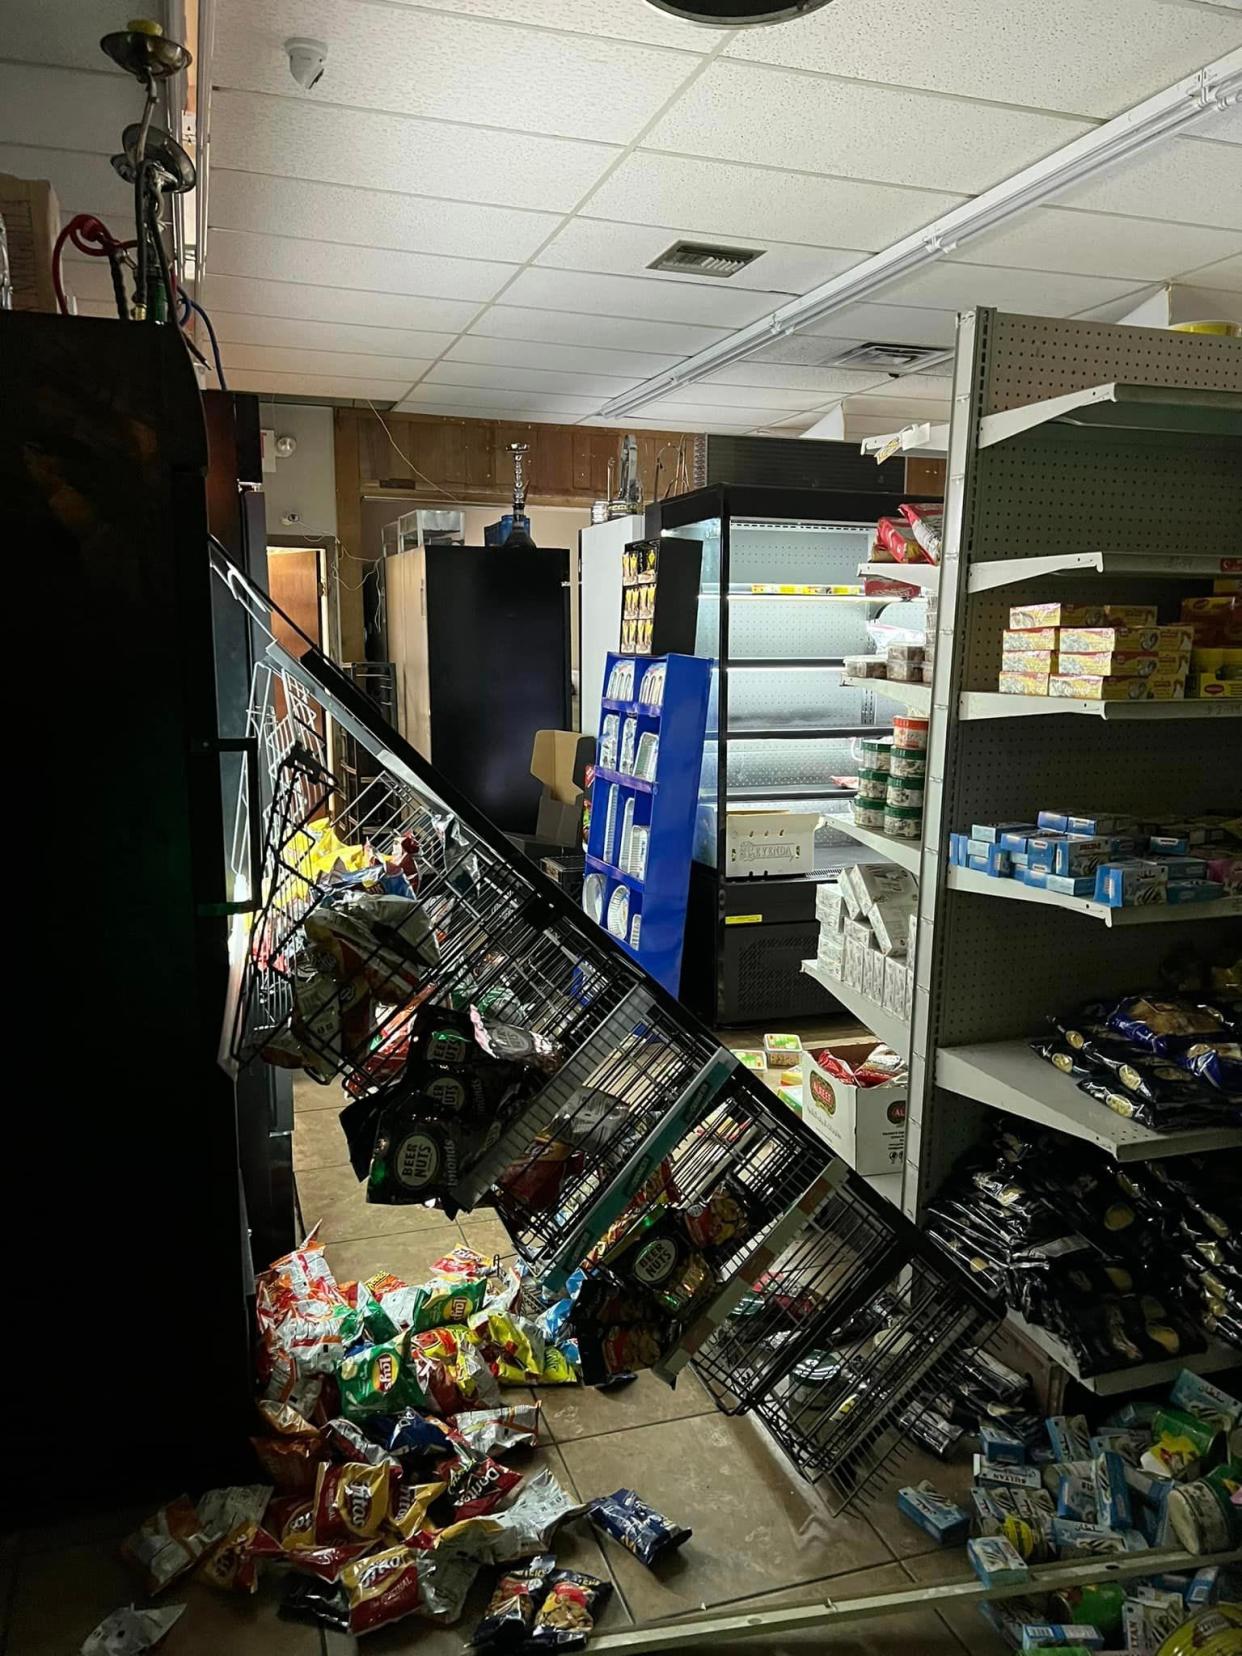 Pictured is the aftermath of a vandalism at Neighborhood Market, in eastern Sioux Falls.